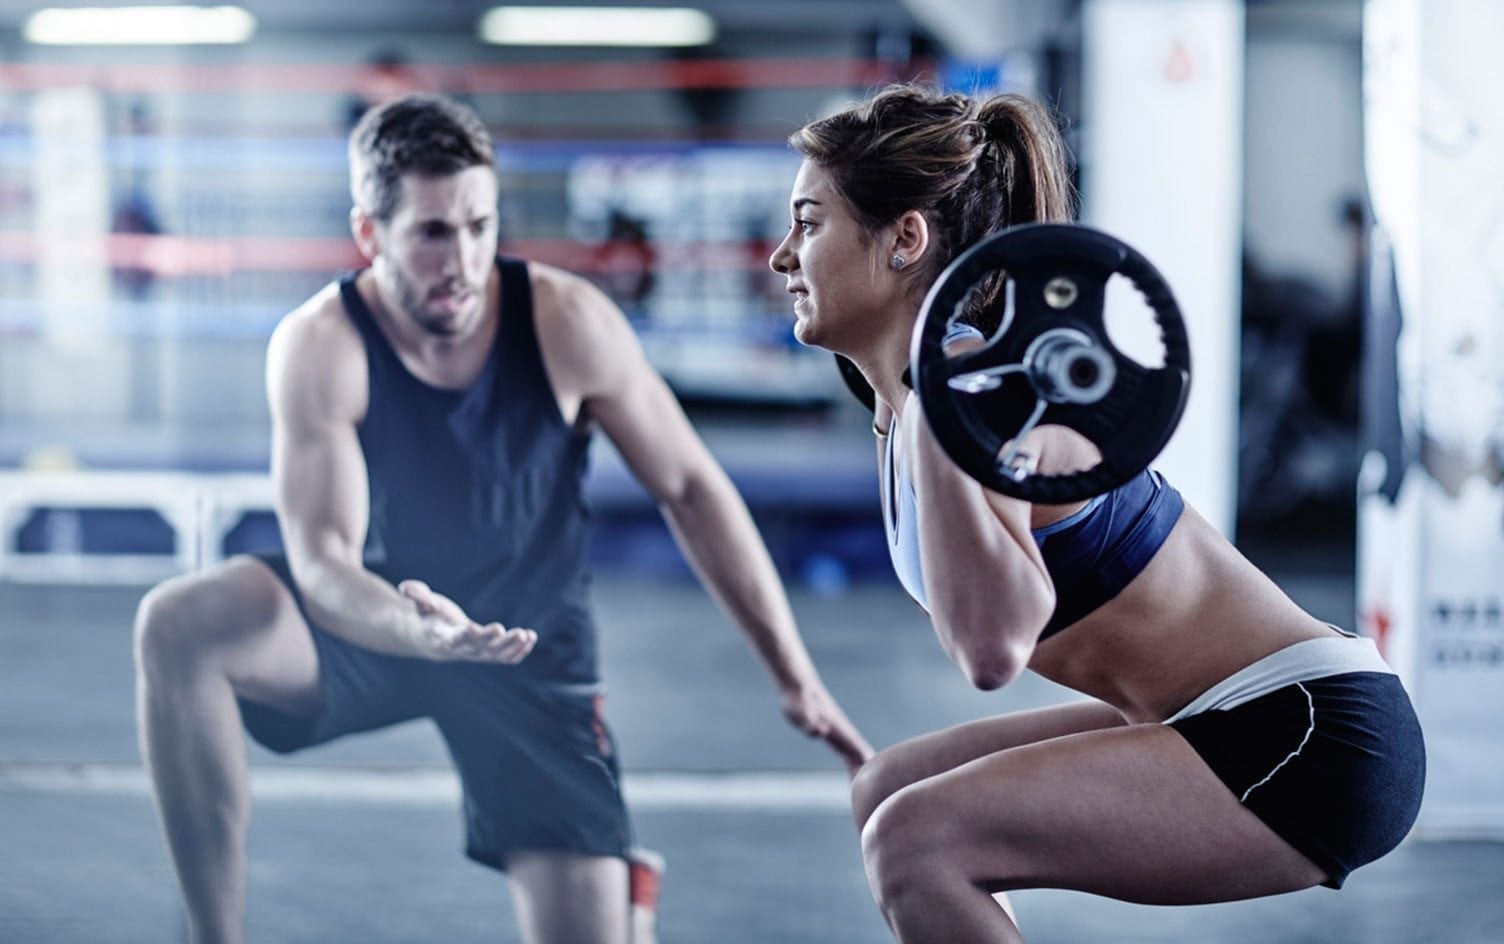 10 Things to Look for in Your Personal Trainer | Fitness | MyFitnessPal